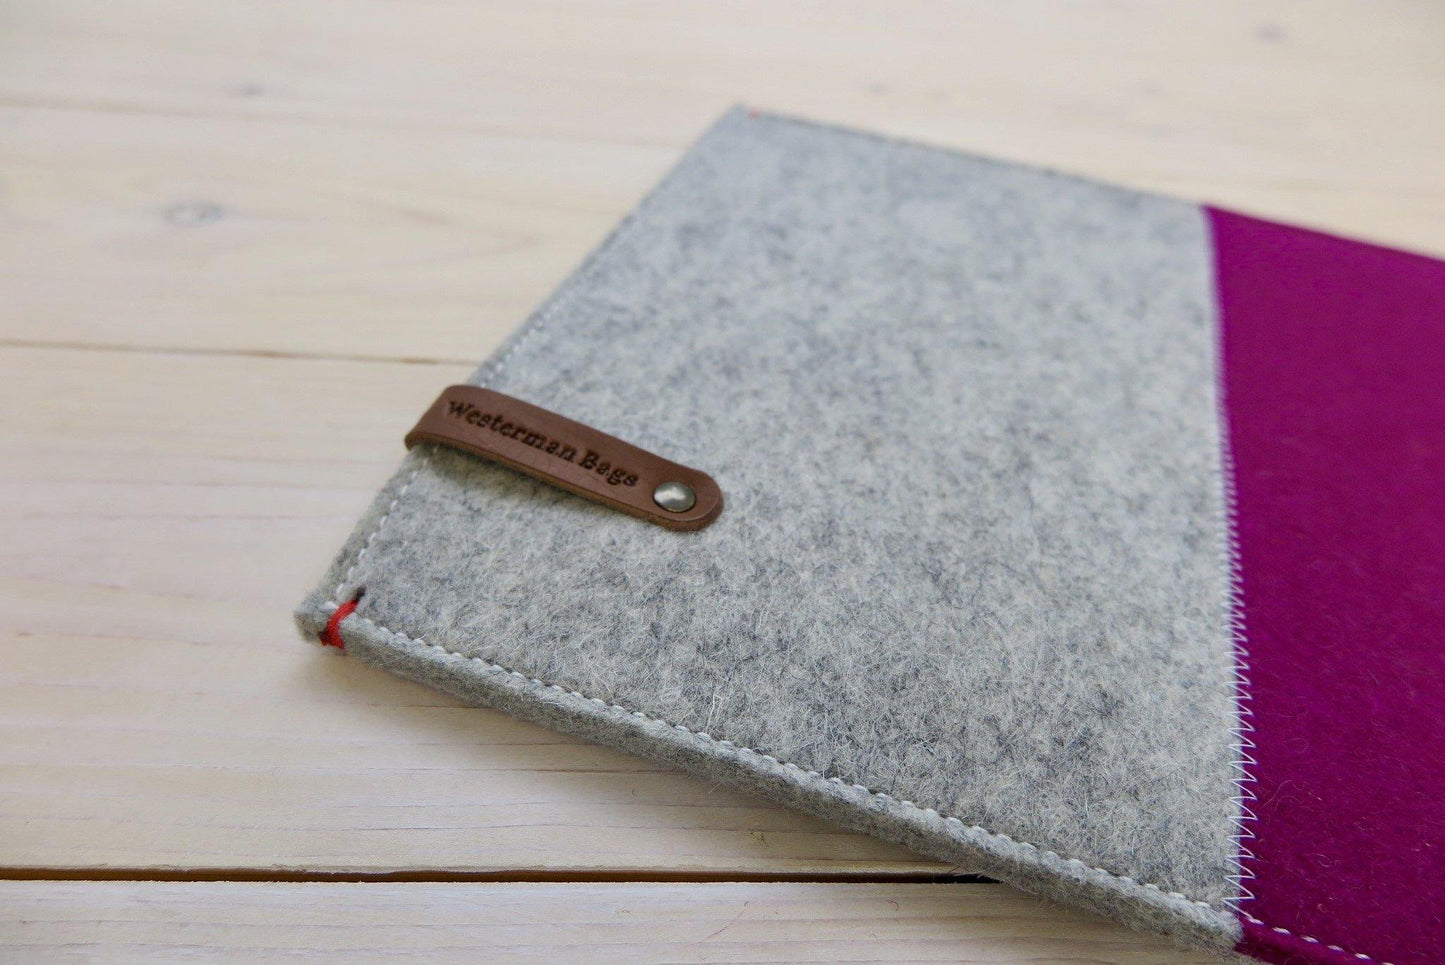 felt iPad sleeve from the Netherlands in grey and pink